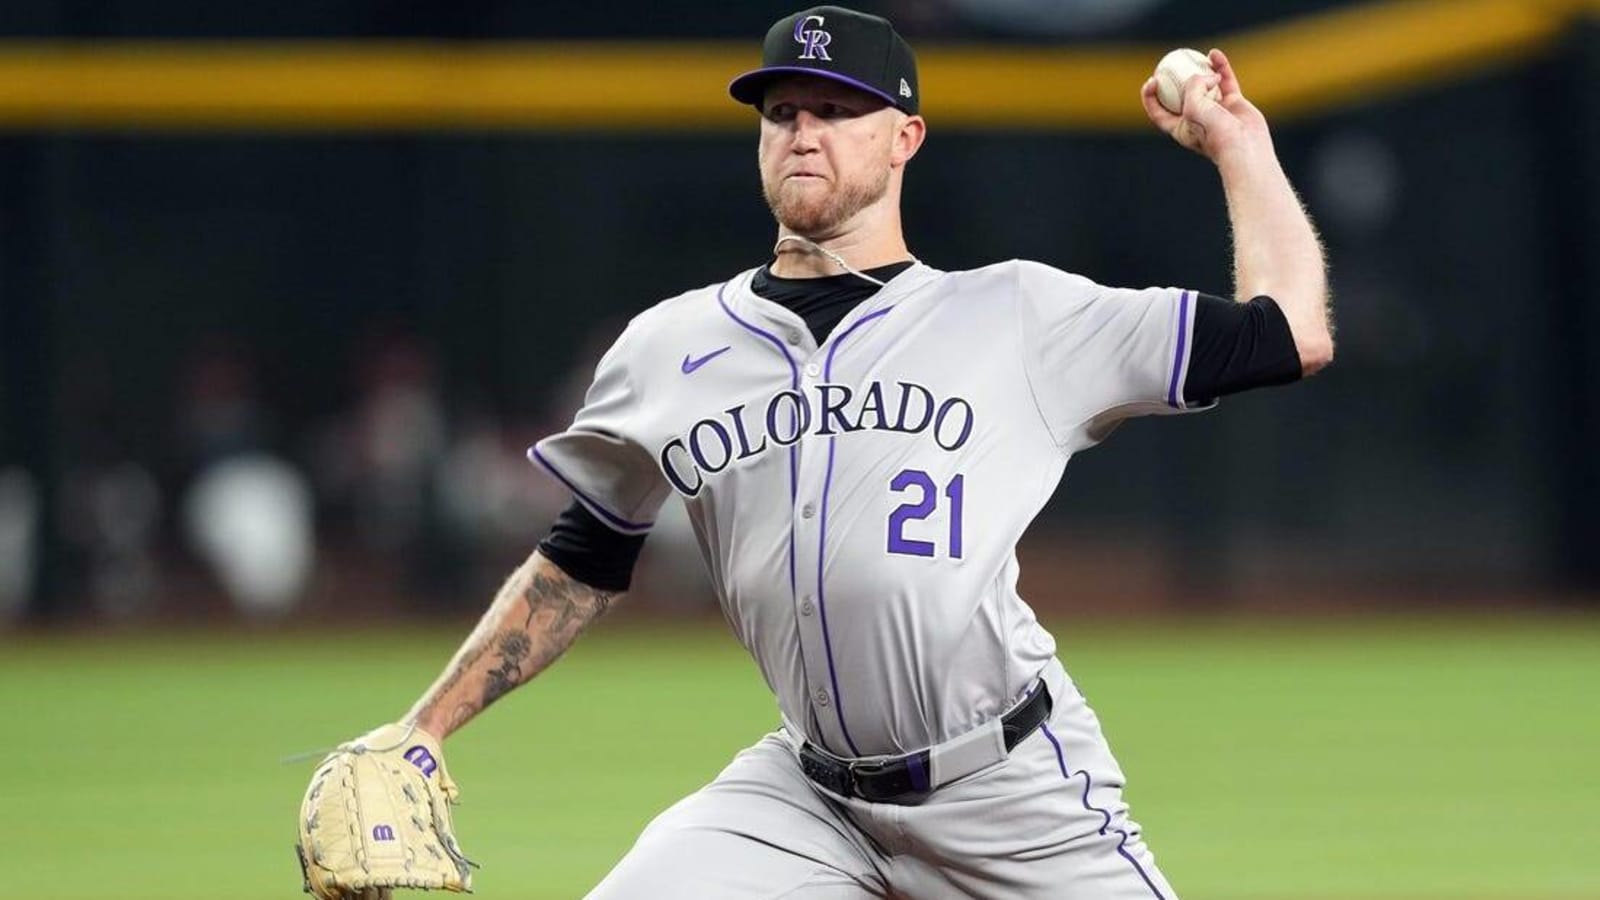 Second season start on tap for Rockies&#39; Kyle Freeland as he faces Cubs